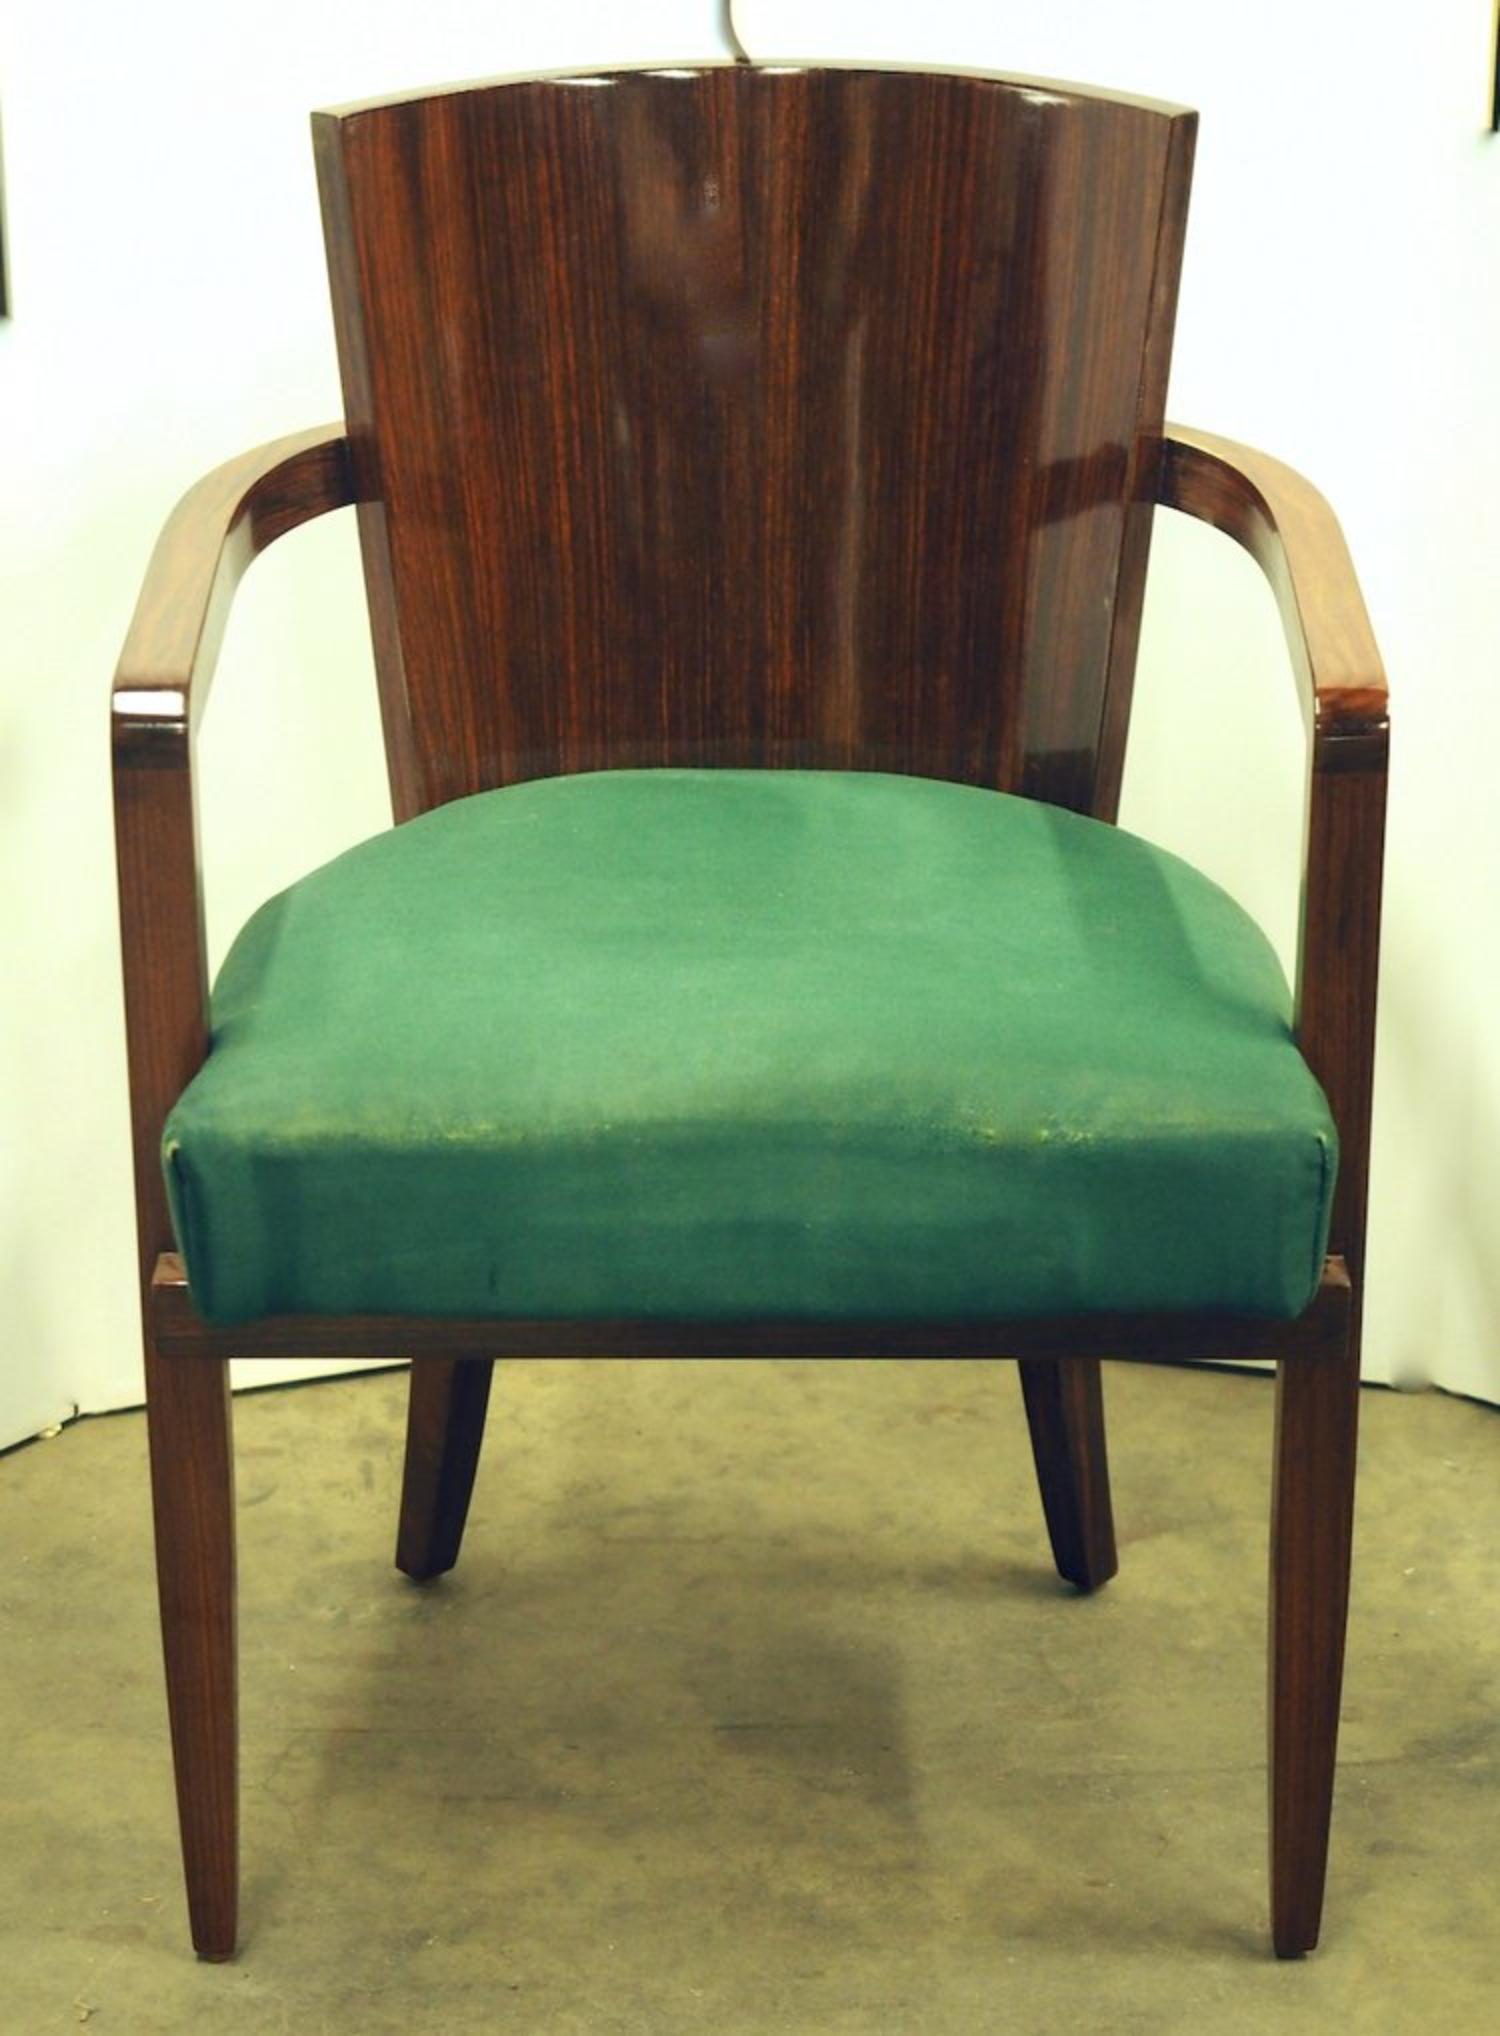 French Modernist Art Deco set of six armchairs by Jacques Adnet in rosewood, circa 1935. 24” wide x 26” deep x 30” high. Restored, refinished. Need new upholstery.

JACQUES ADNET

(1900-1984)

An icon of luxurious French Modernism,JACQUES